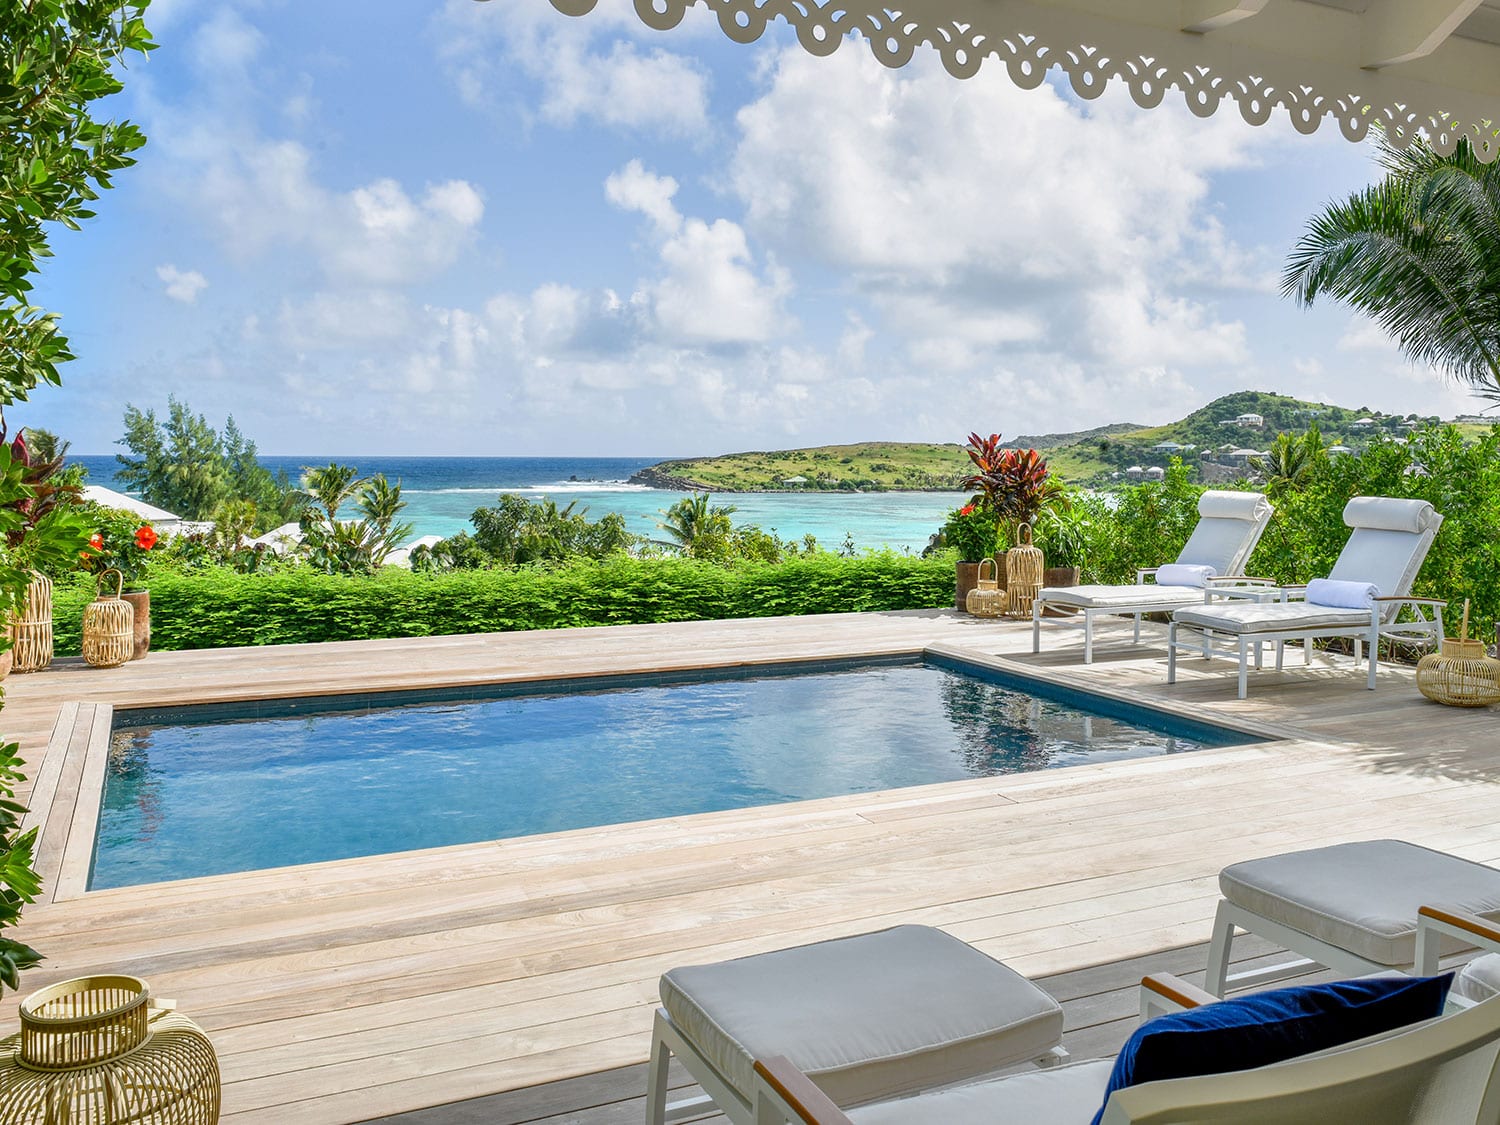 A view from the guest suite at Rosewood Le Guanahani on the Caribbean island of St. Barth.